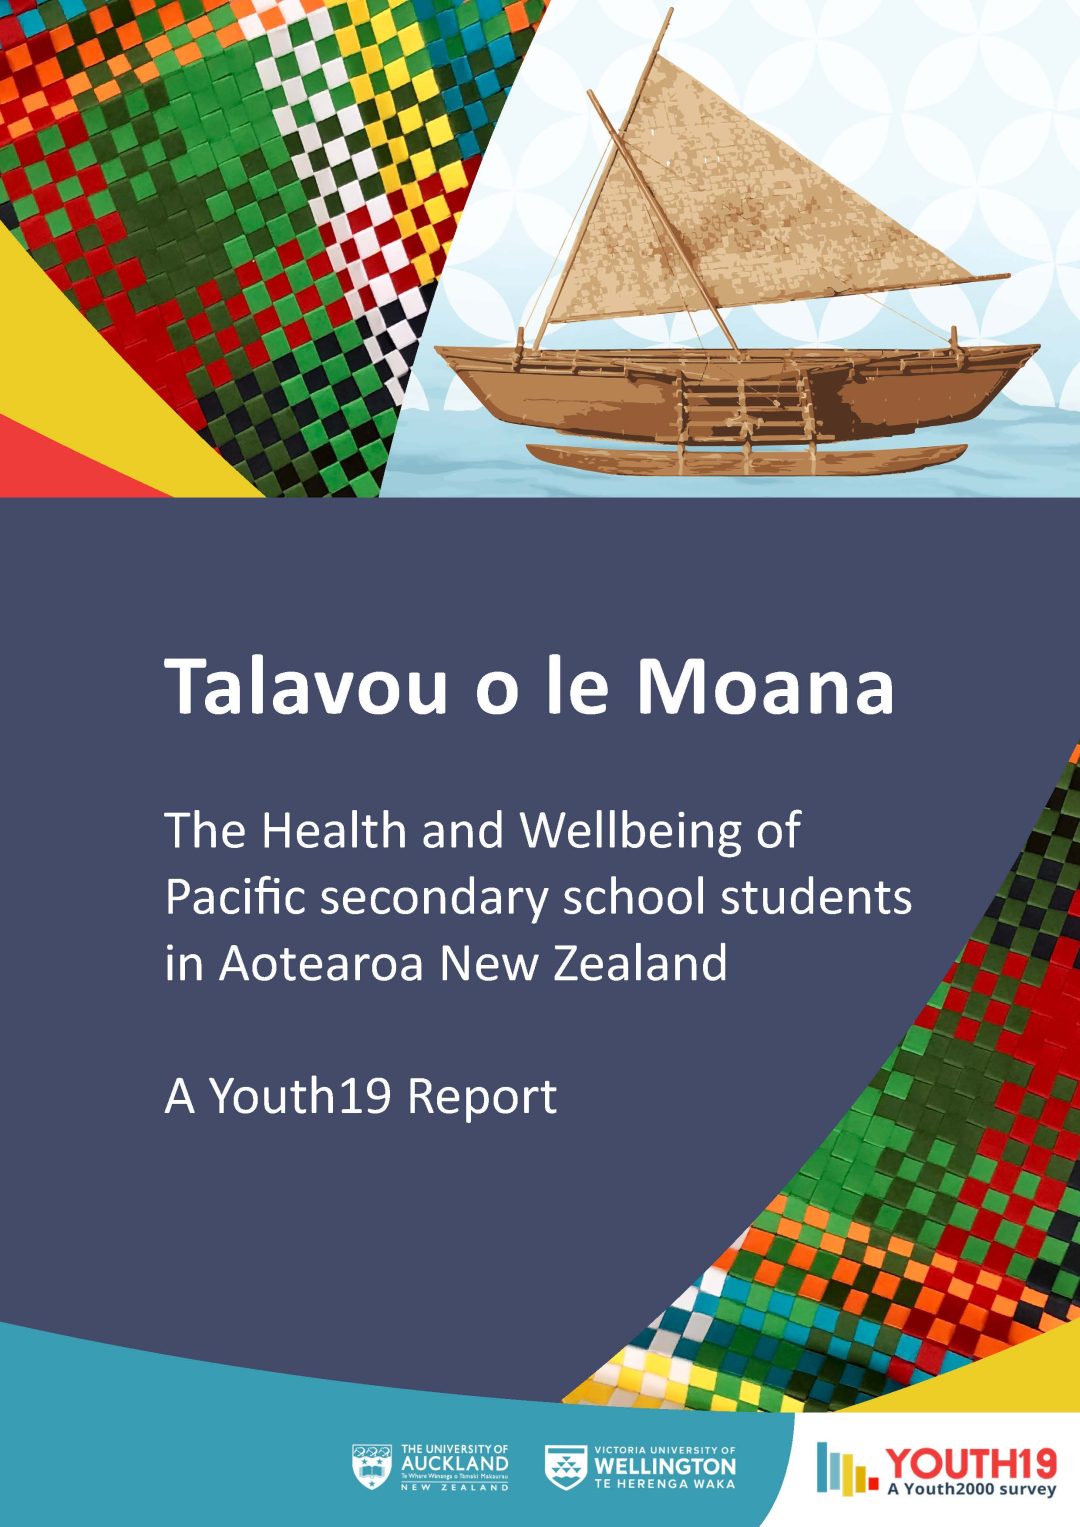 Talavou o le Moana: The Health and Wellbeing of Pacific secondary school students in Aotearoa New Zealand